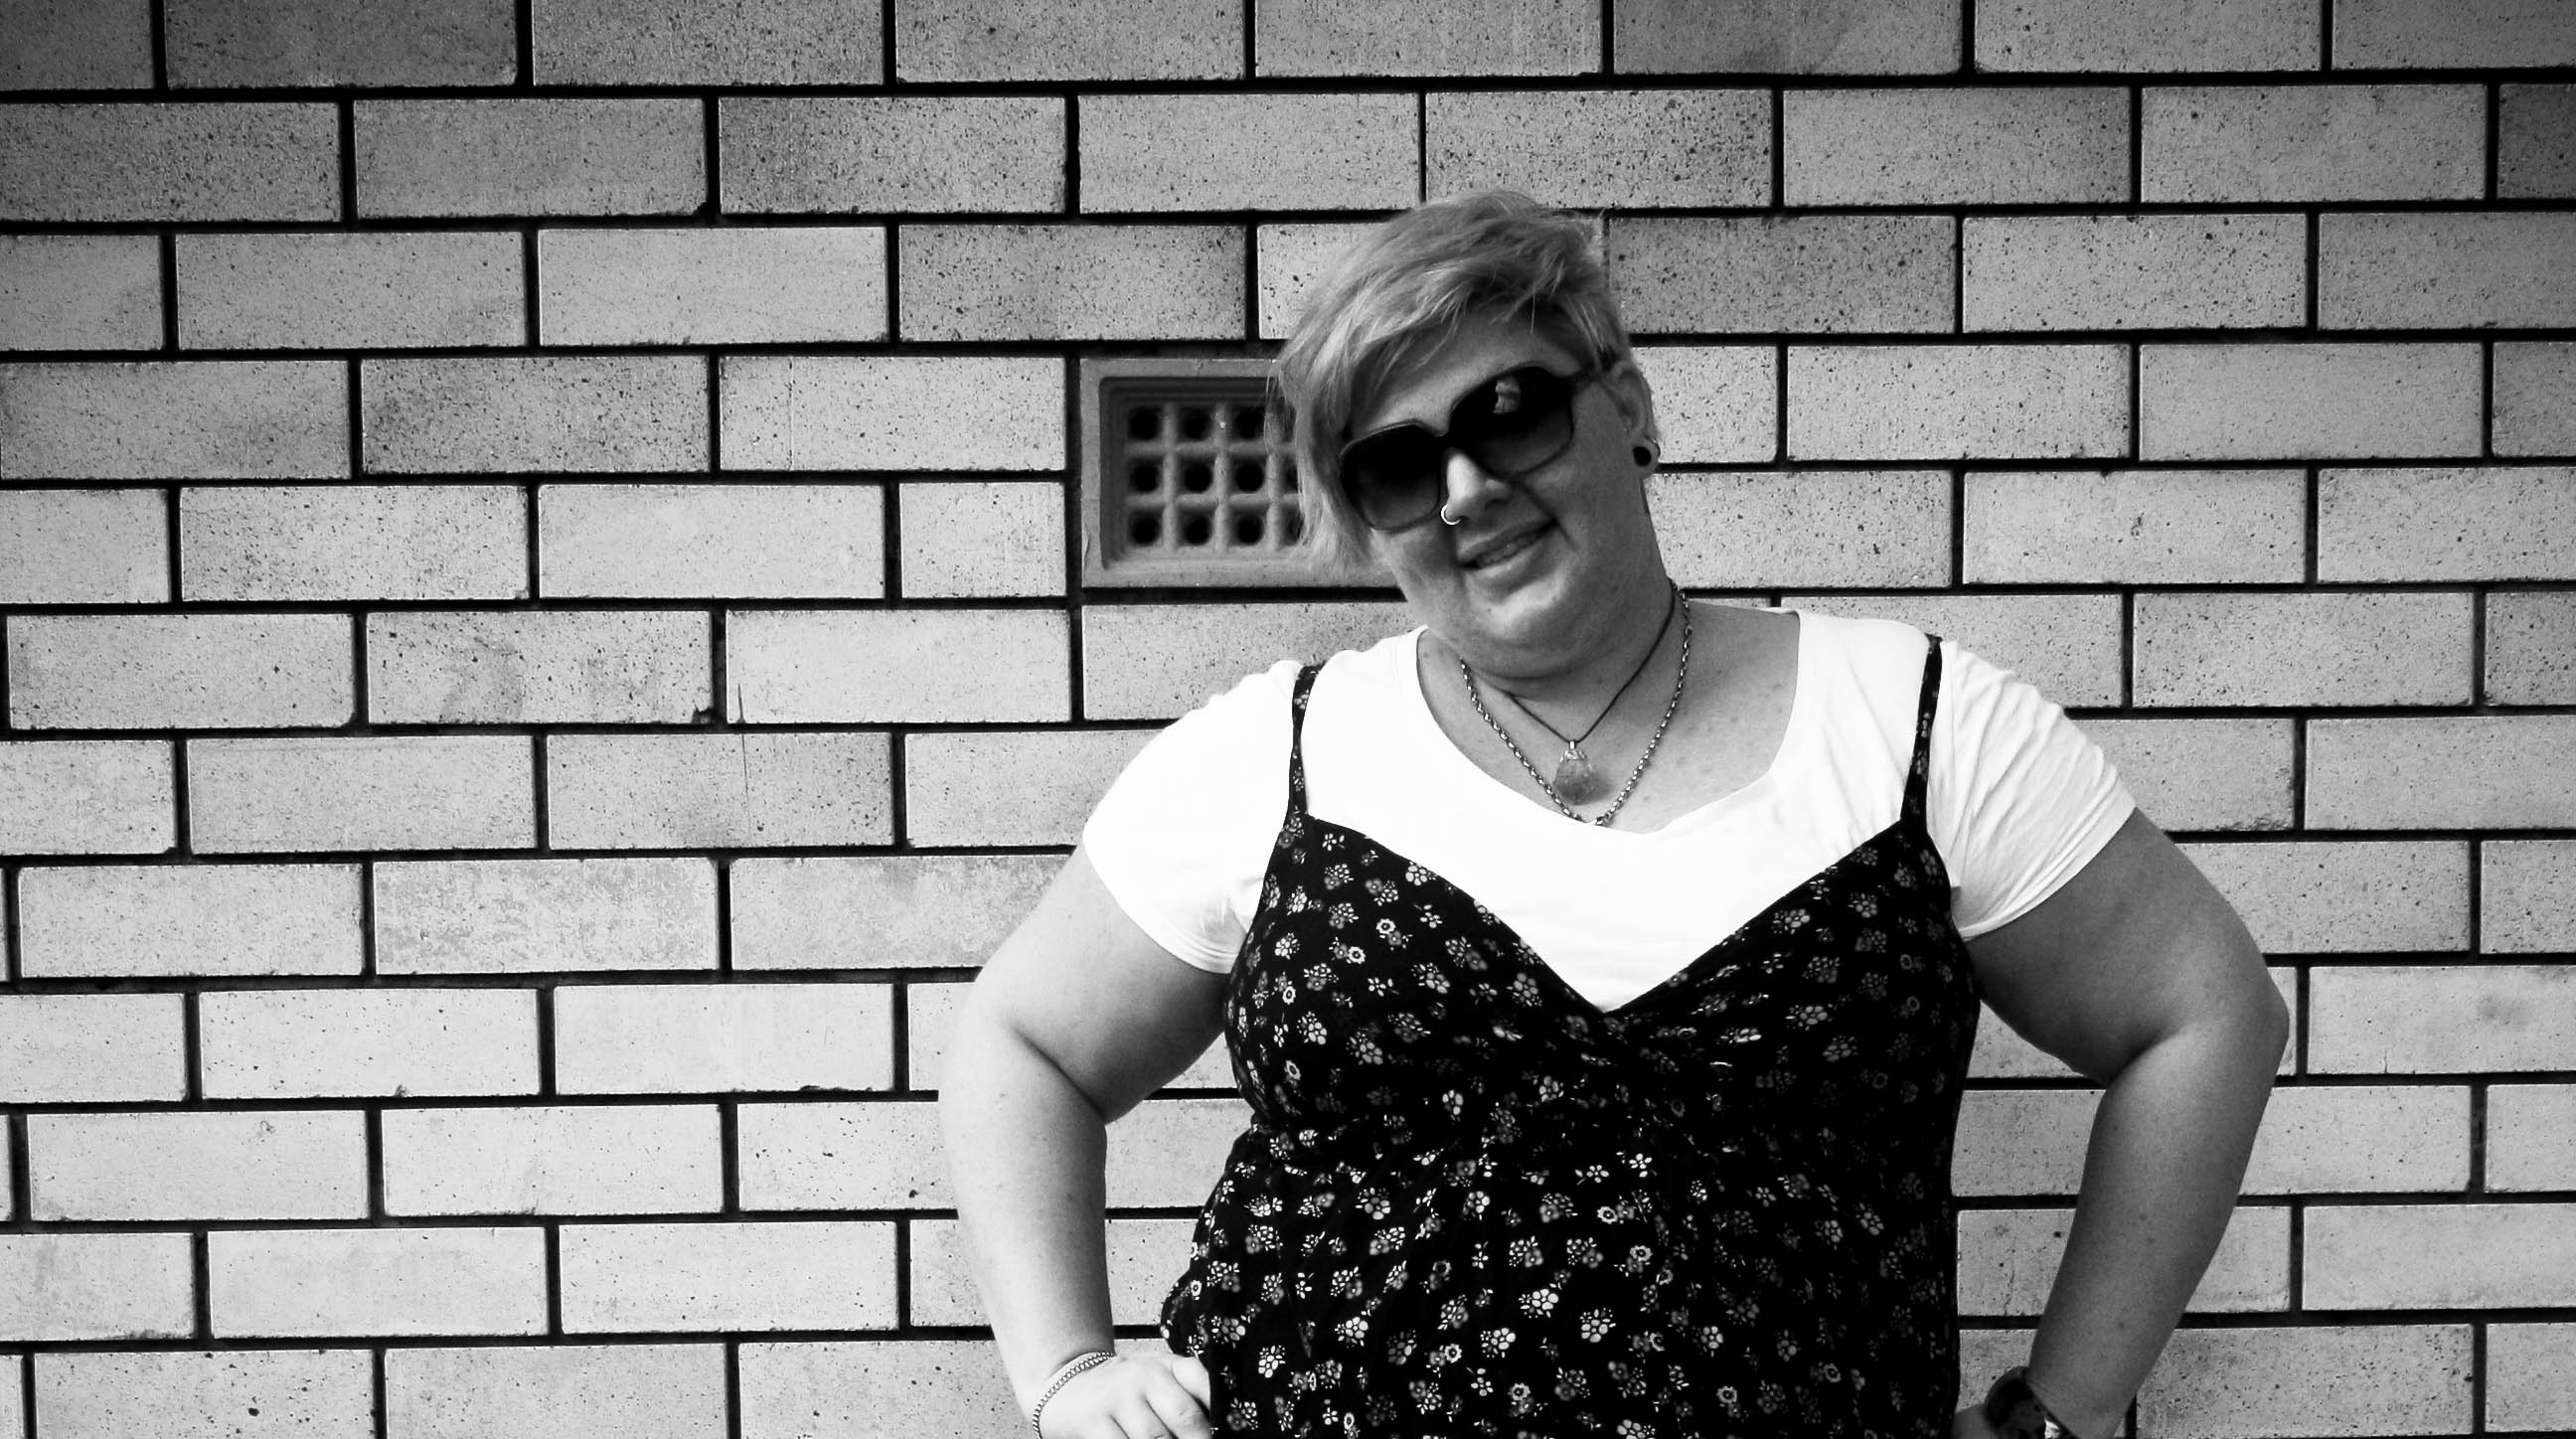 Photo of me standing against a brick wall, hands on hips and smiling.